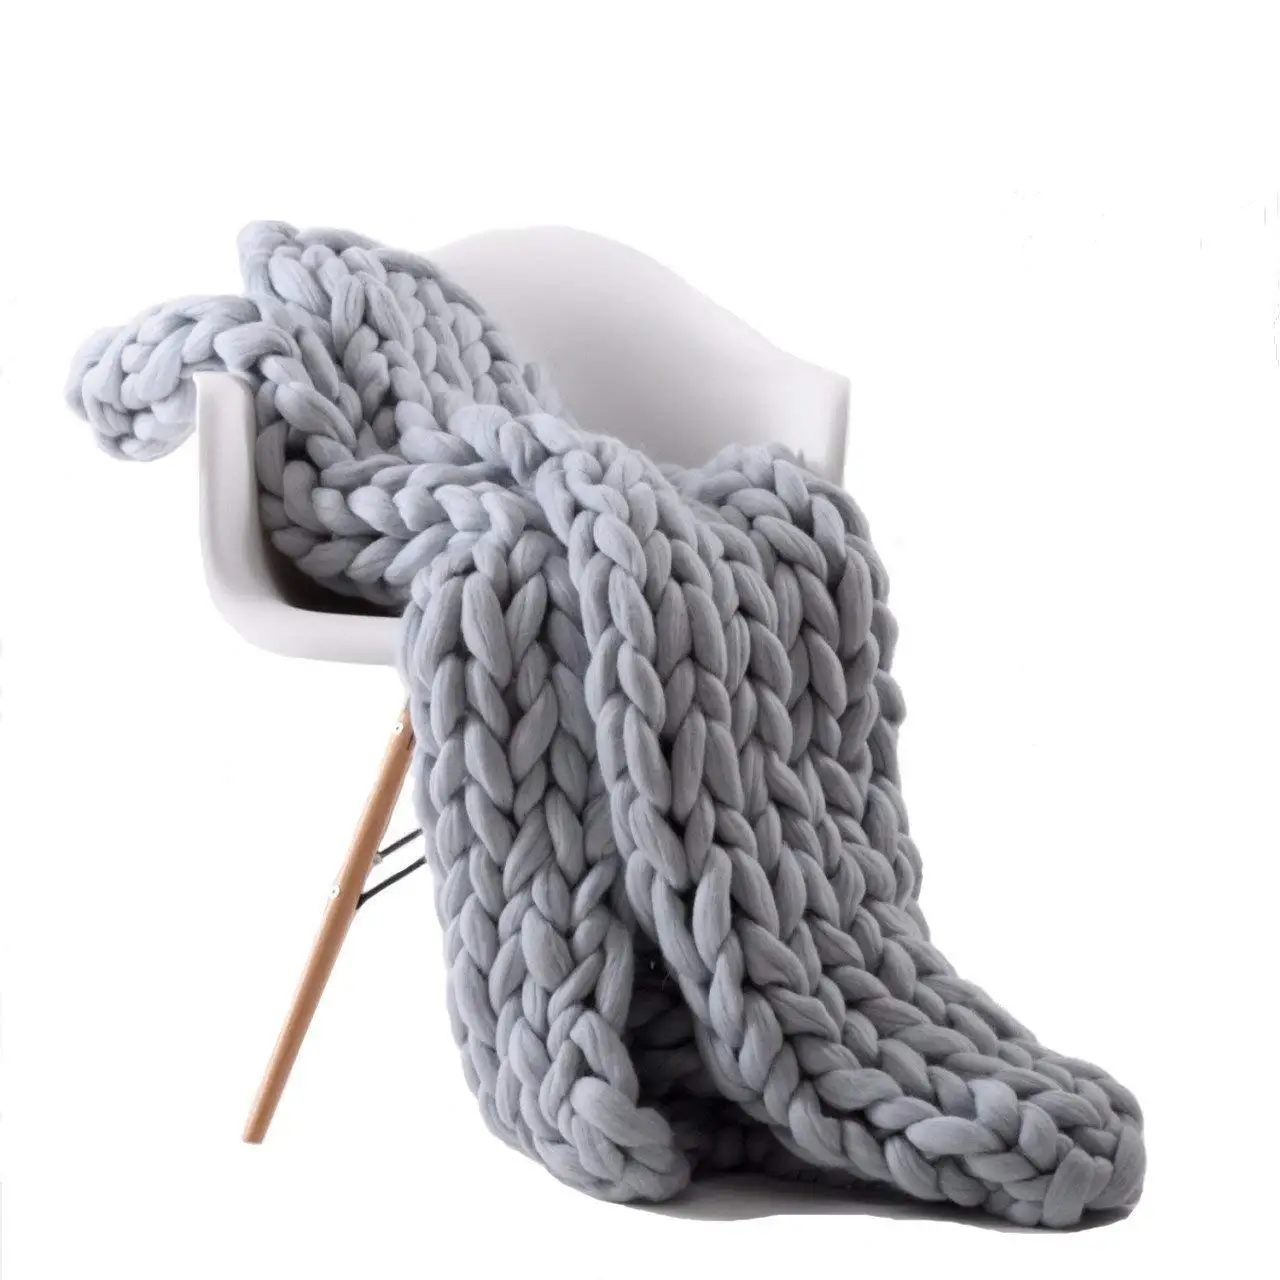 Buy DIRUNEN Chunky Knit Blanket Wool Arm Knitted Throw Super Large Hand Made Knitting Yarn Pet Bed Chair Sofa Yoga Mat Rug Gray 120180 In Cheap Price On Alibabacom